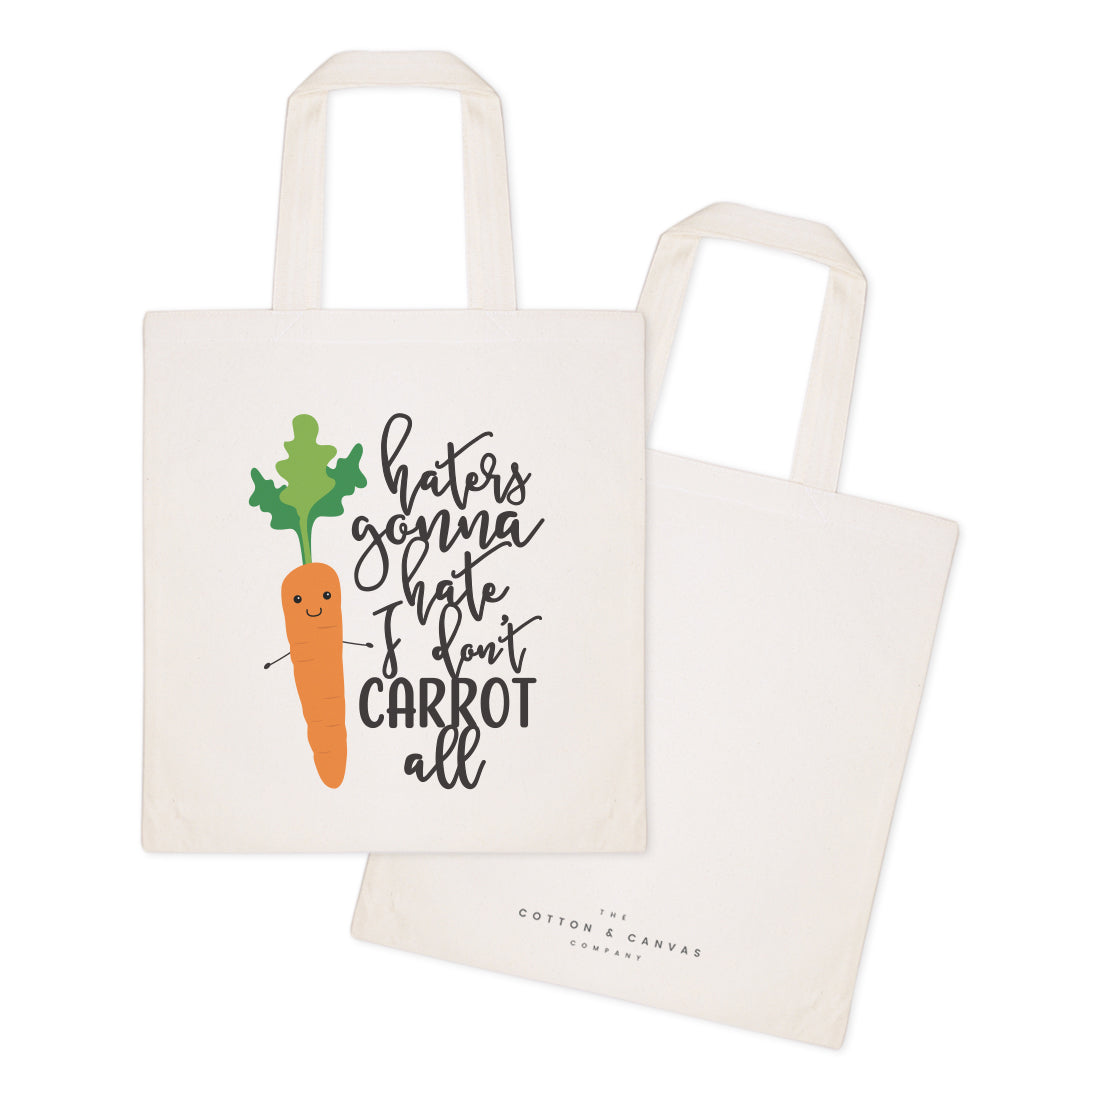 Haters Gonna Hate, I Don't Carrot All Cotton Canvas Tote Bag by The Cotton & Canvas Co.